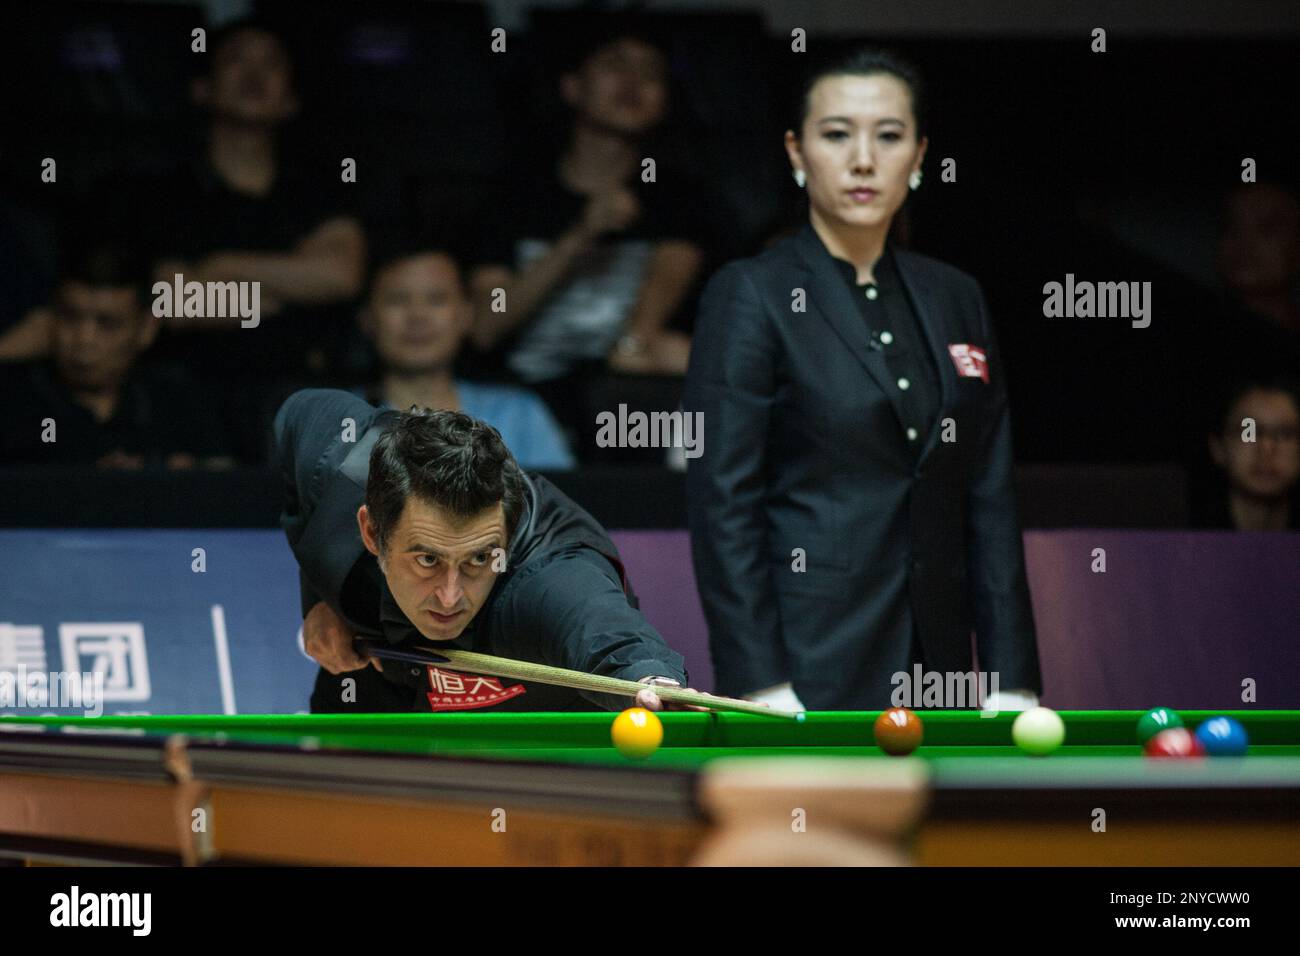 Ronnie OSullivan of England plays a shot to Luca Brecel of Belgium in the quarterfinal match during the 2017 China Championship snooker tournament in Guangzhou city, south Chinas Guangdong province, 20 August